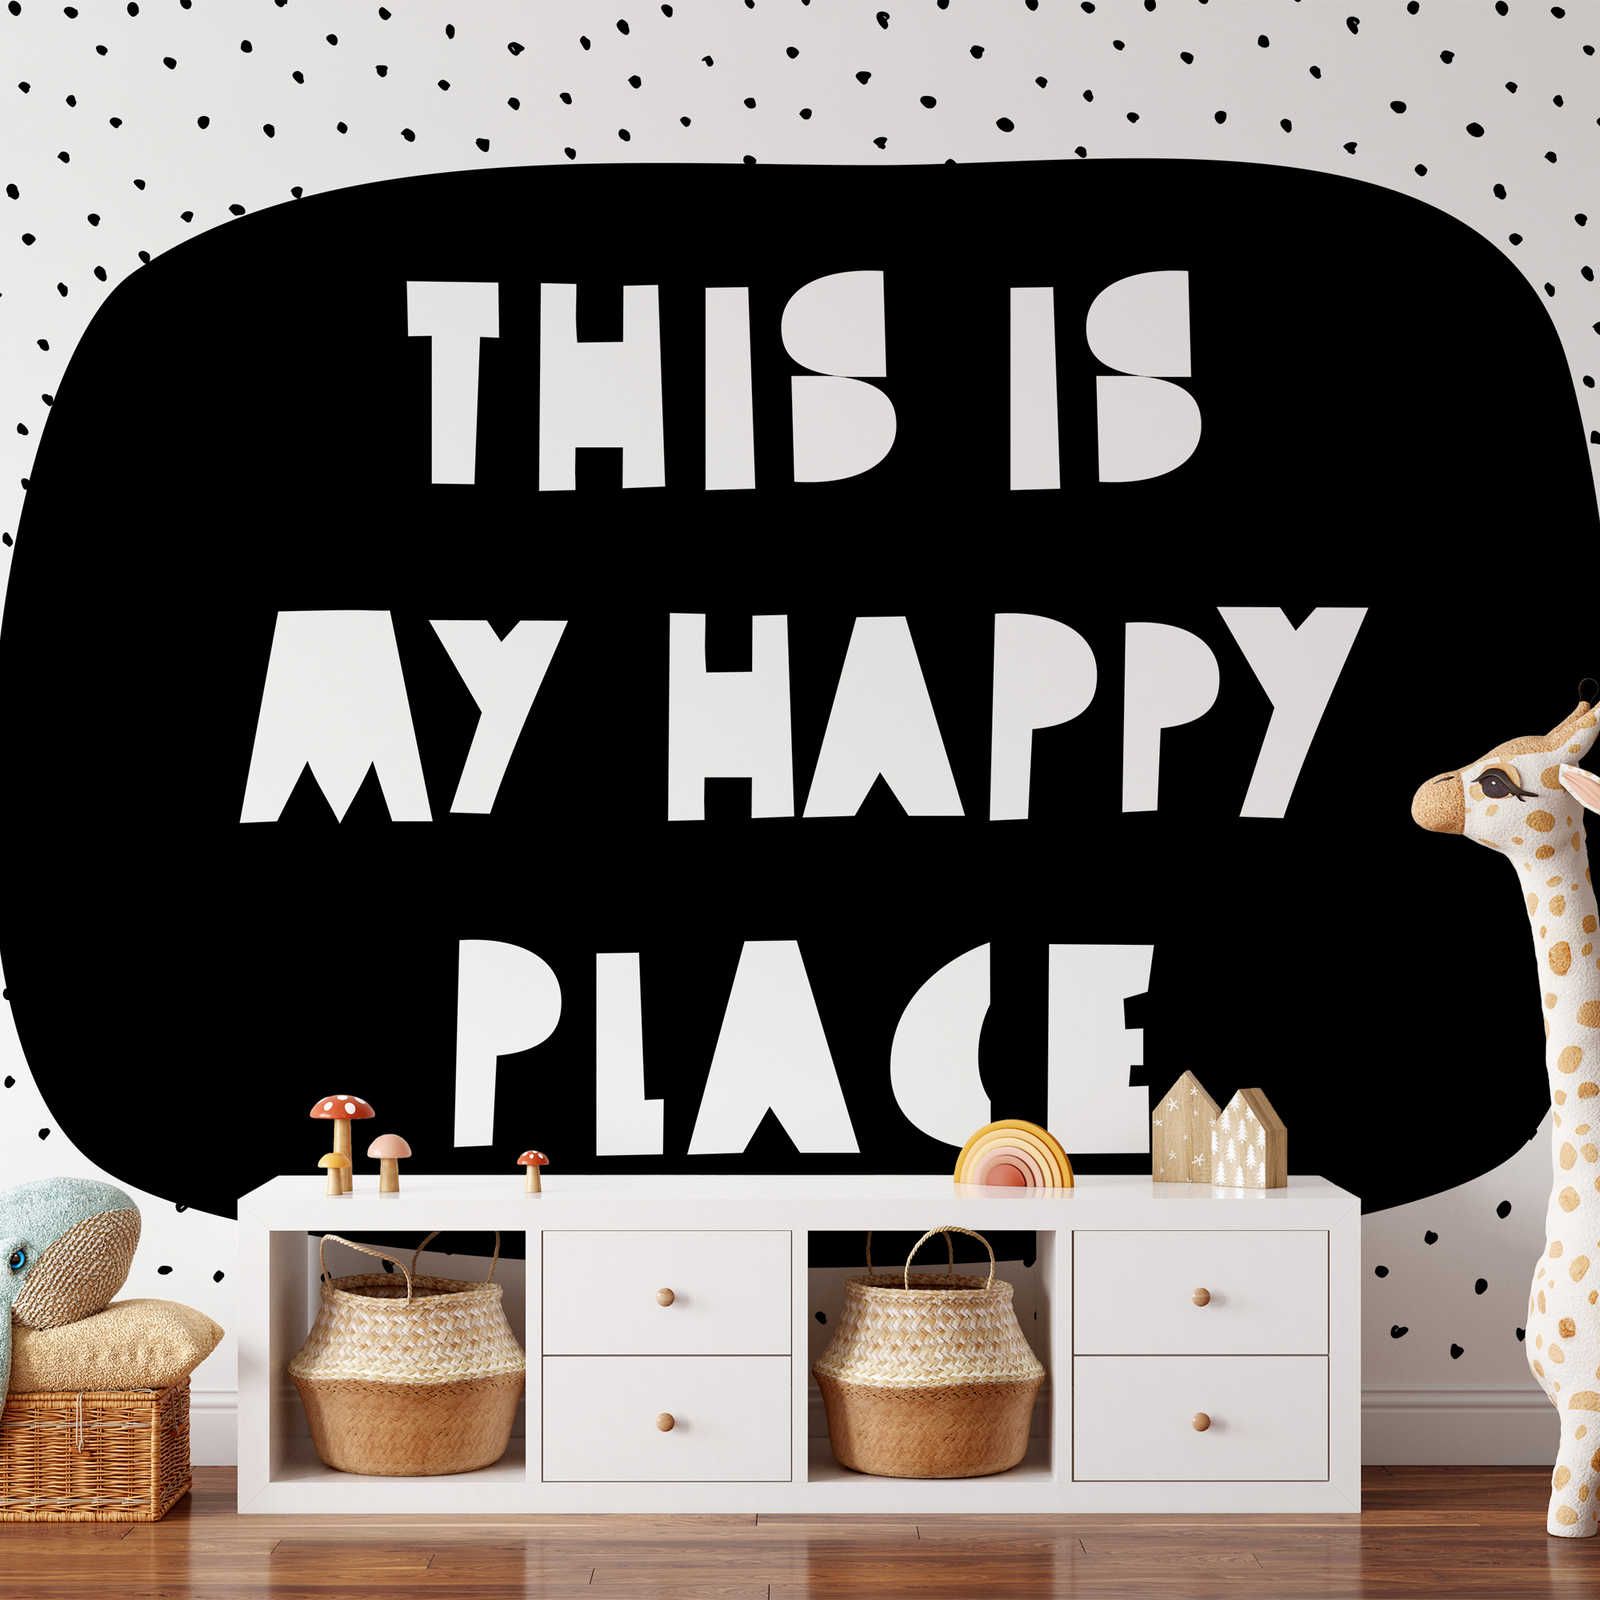 Photo wallpaper for children's room with lettering "This is my happy place" - Smooth & matt non-woven
